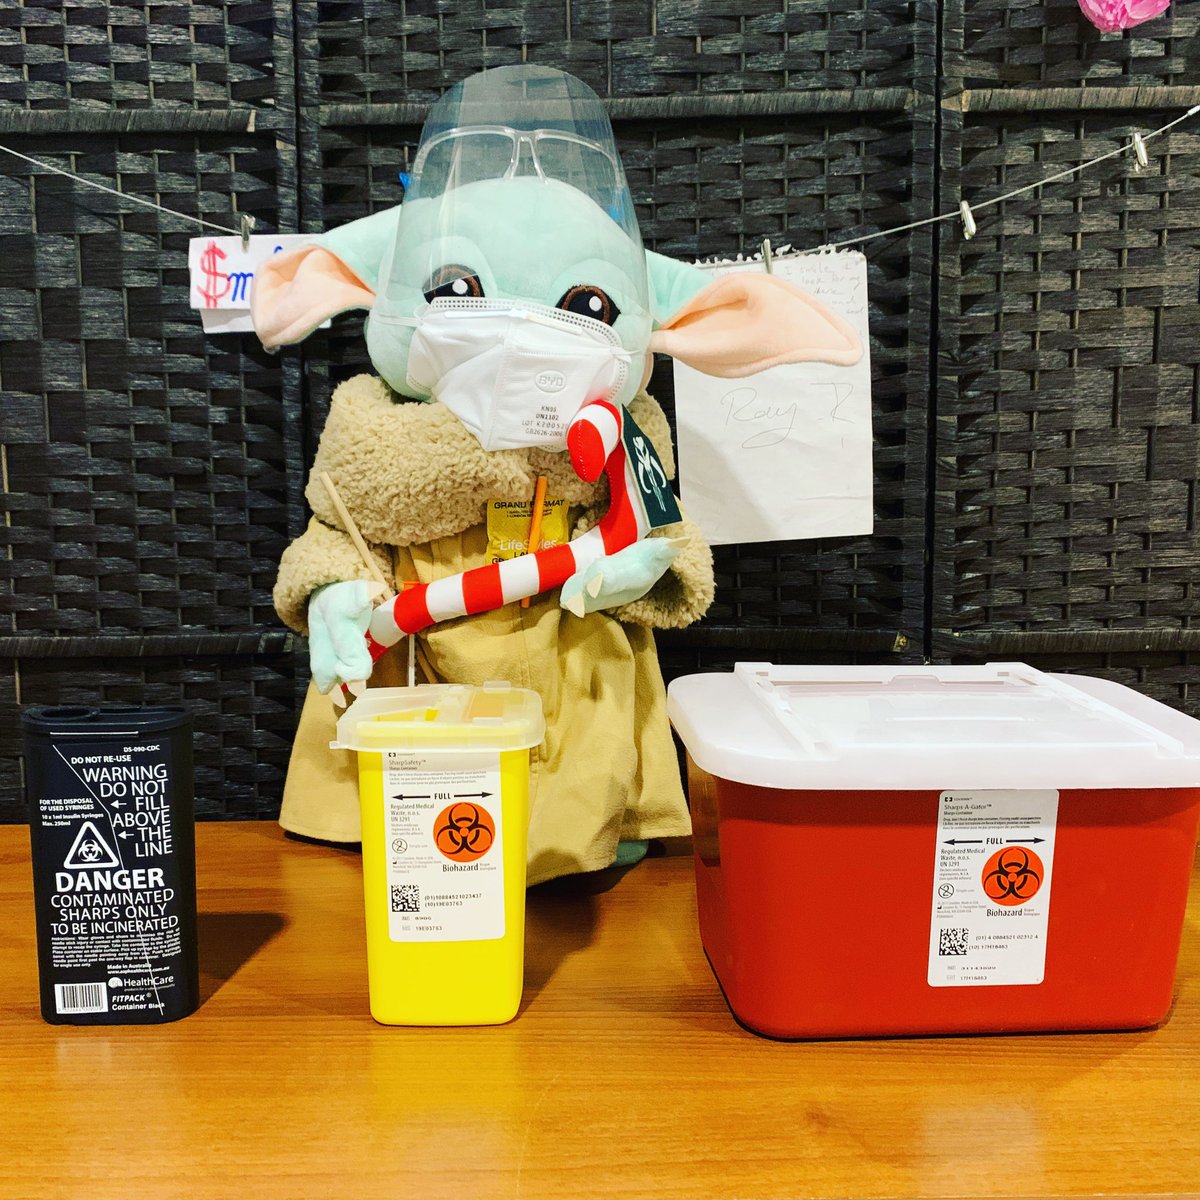 Baby Yoda is thrilled to tell you that KMOPS has all sizes of sharps bins. Swing by 260 Augusta Ave for all your harm reduction needs. 💛🙏 #harmreduction #kensingtonmarket #sharpsbin